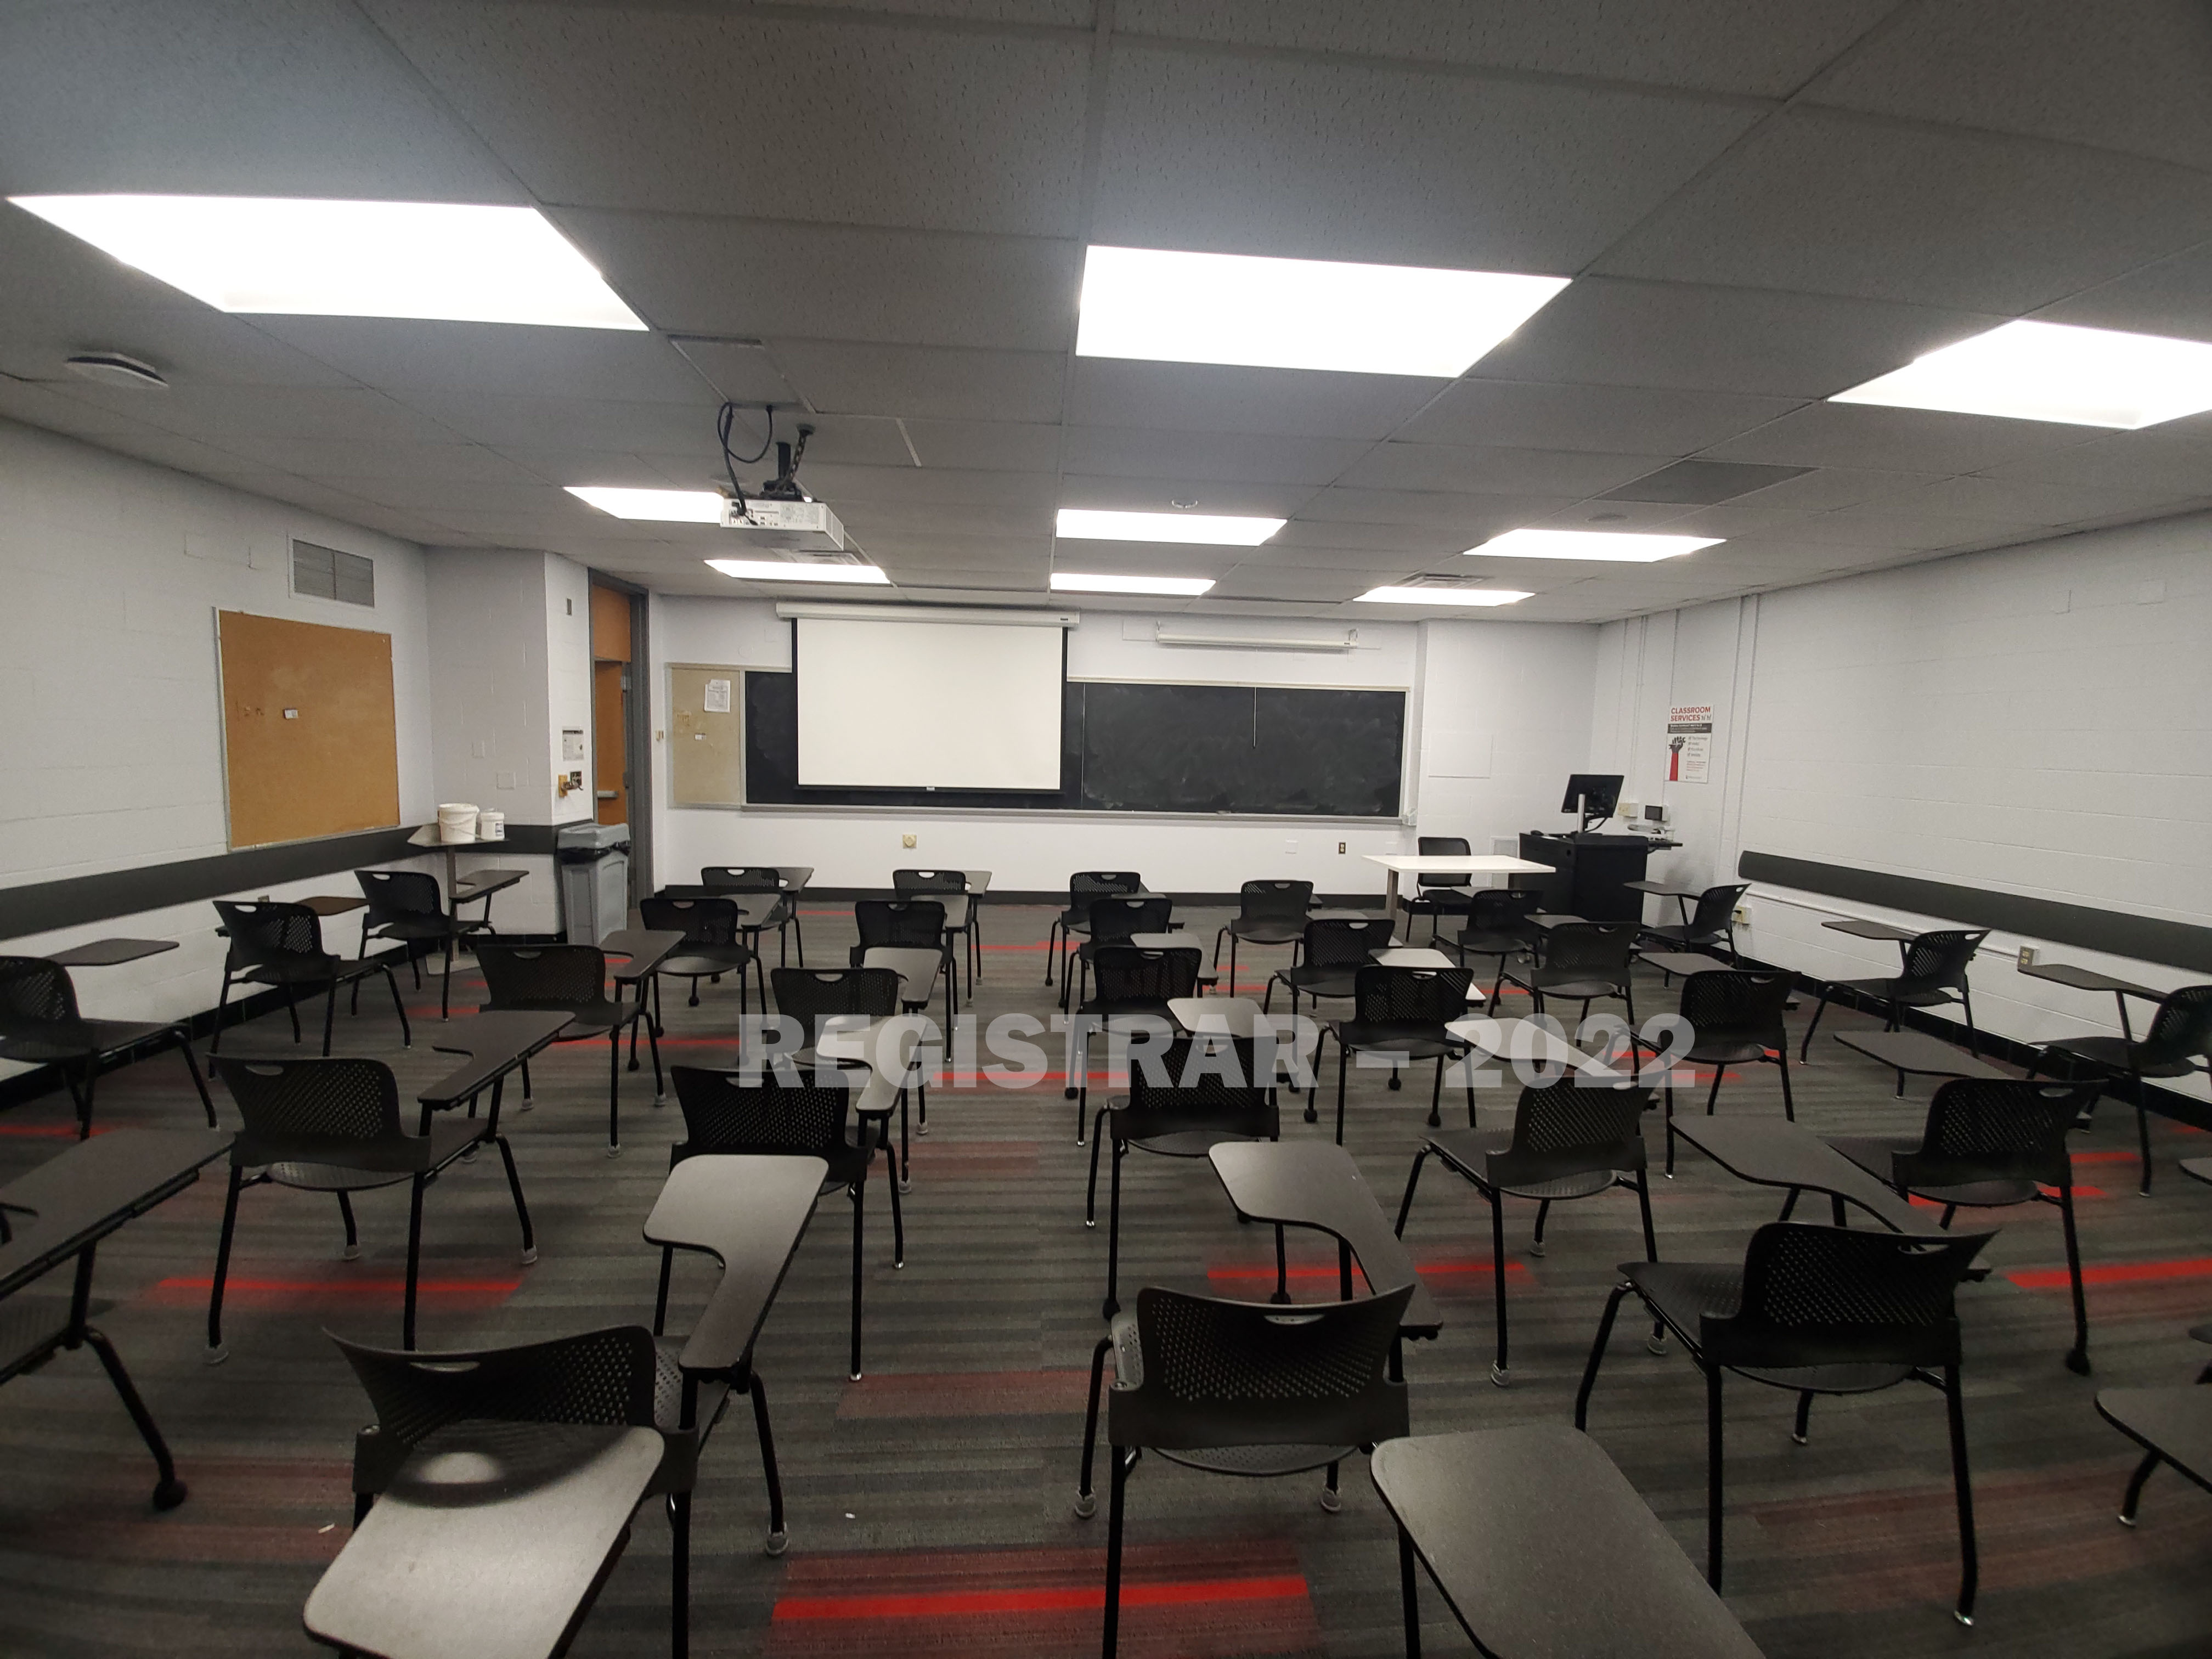 Baker Systems Engineering room 198 ultra wide angle view from the back of the room with projector screen down